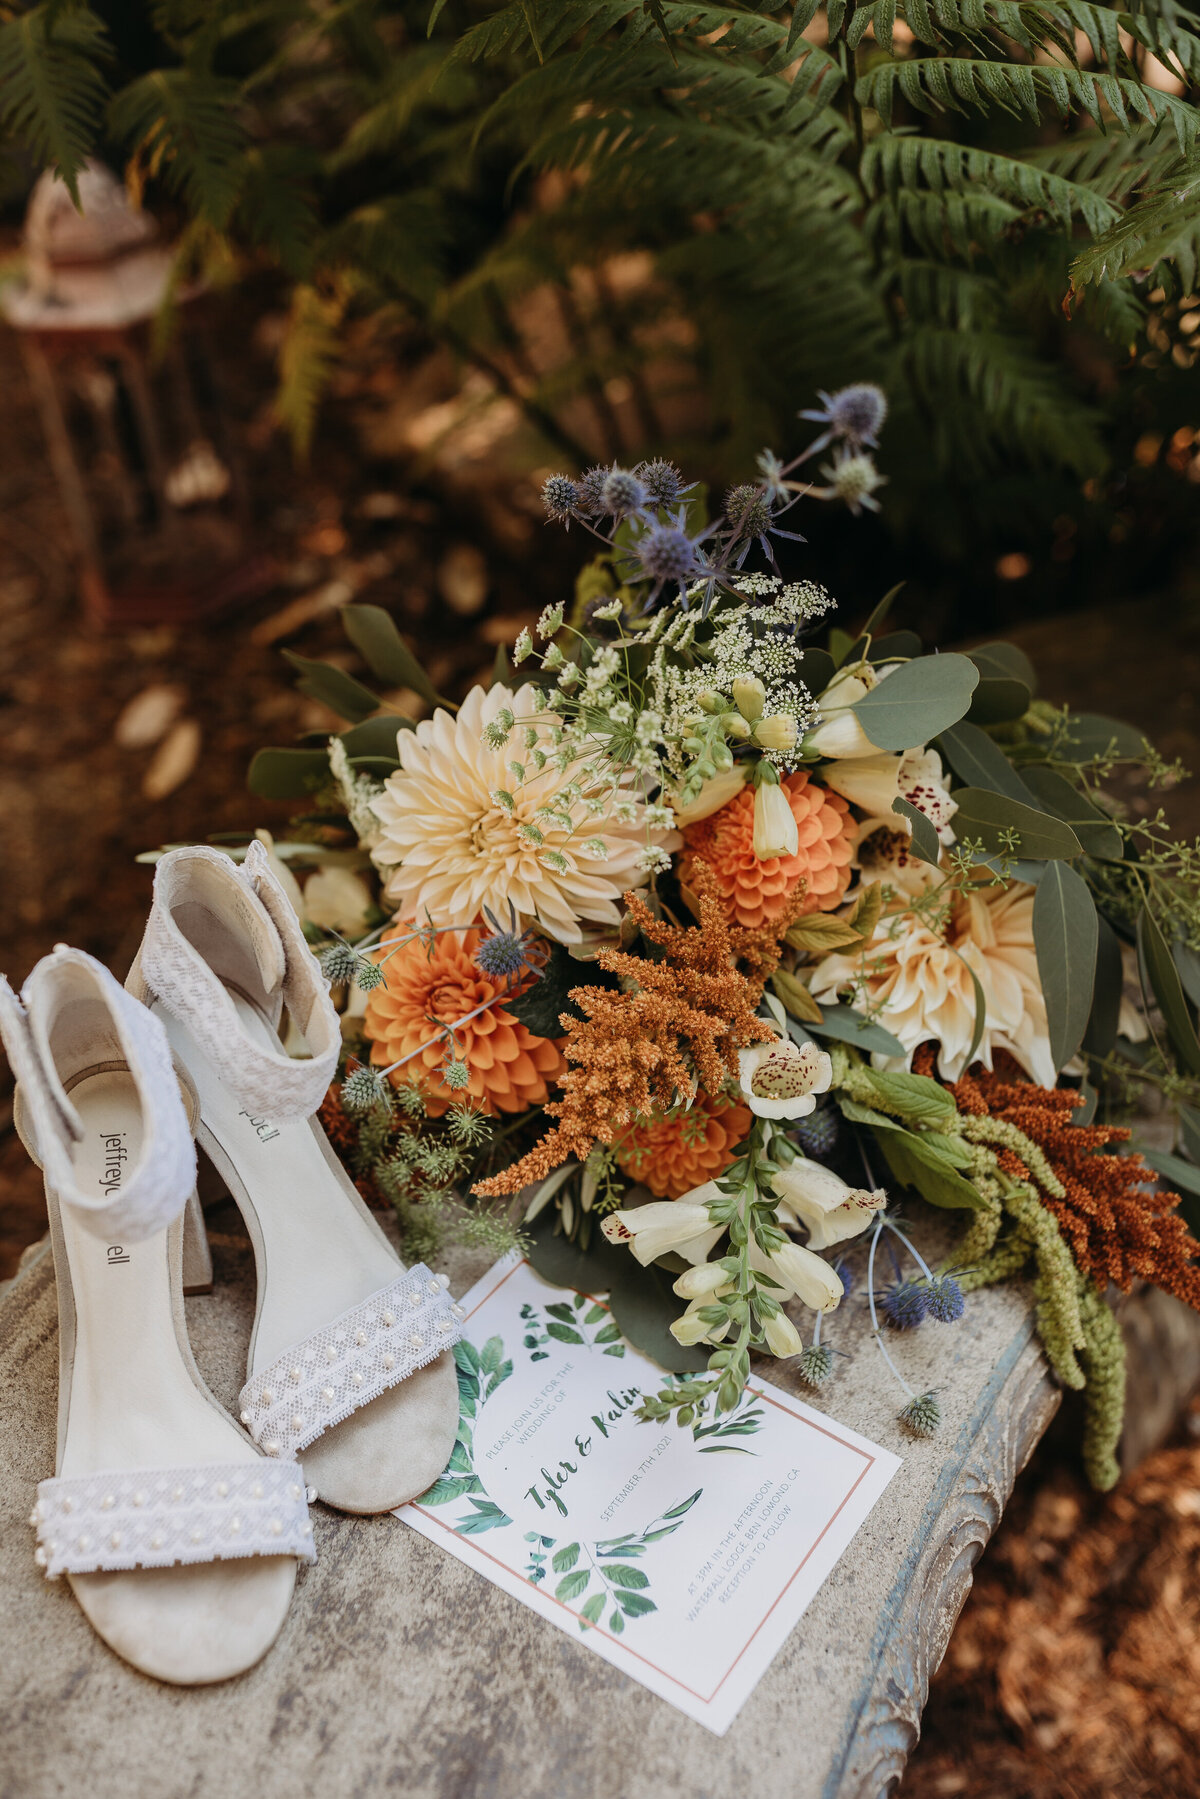 A colorful wildflower bouquet next to bridal shoes and a wedding invitation on a rustic wooden surface